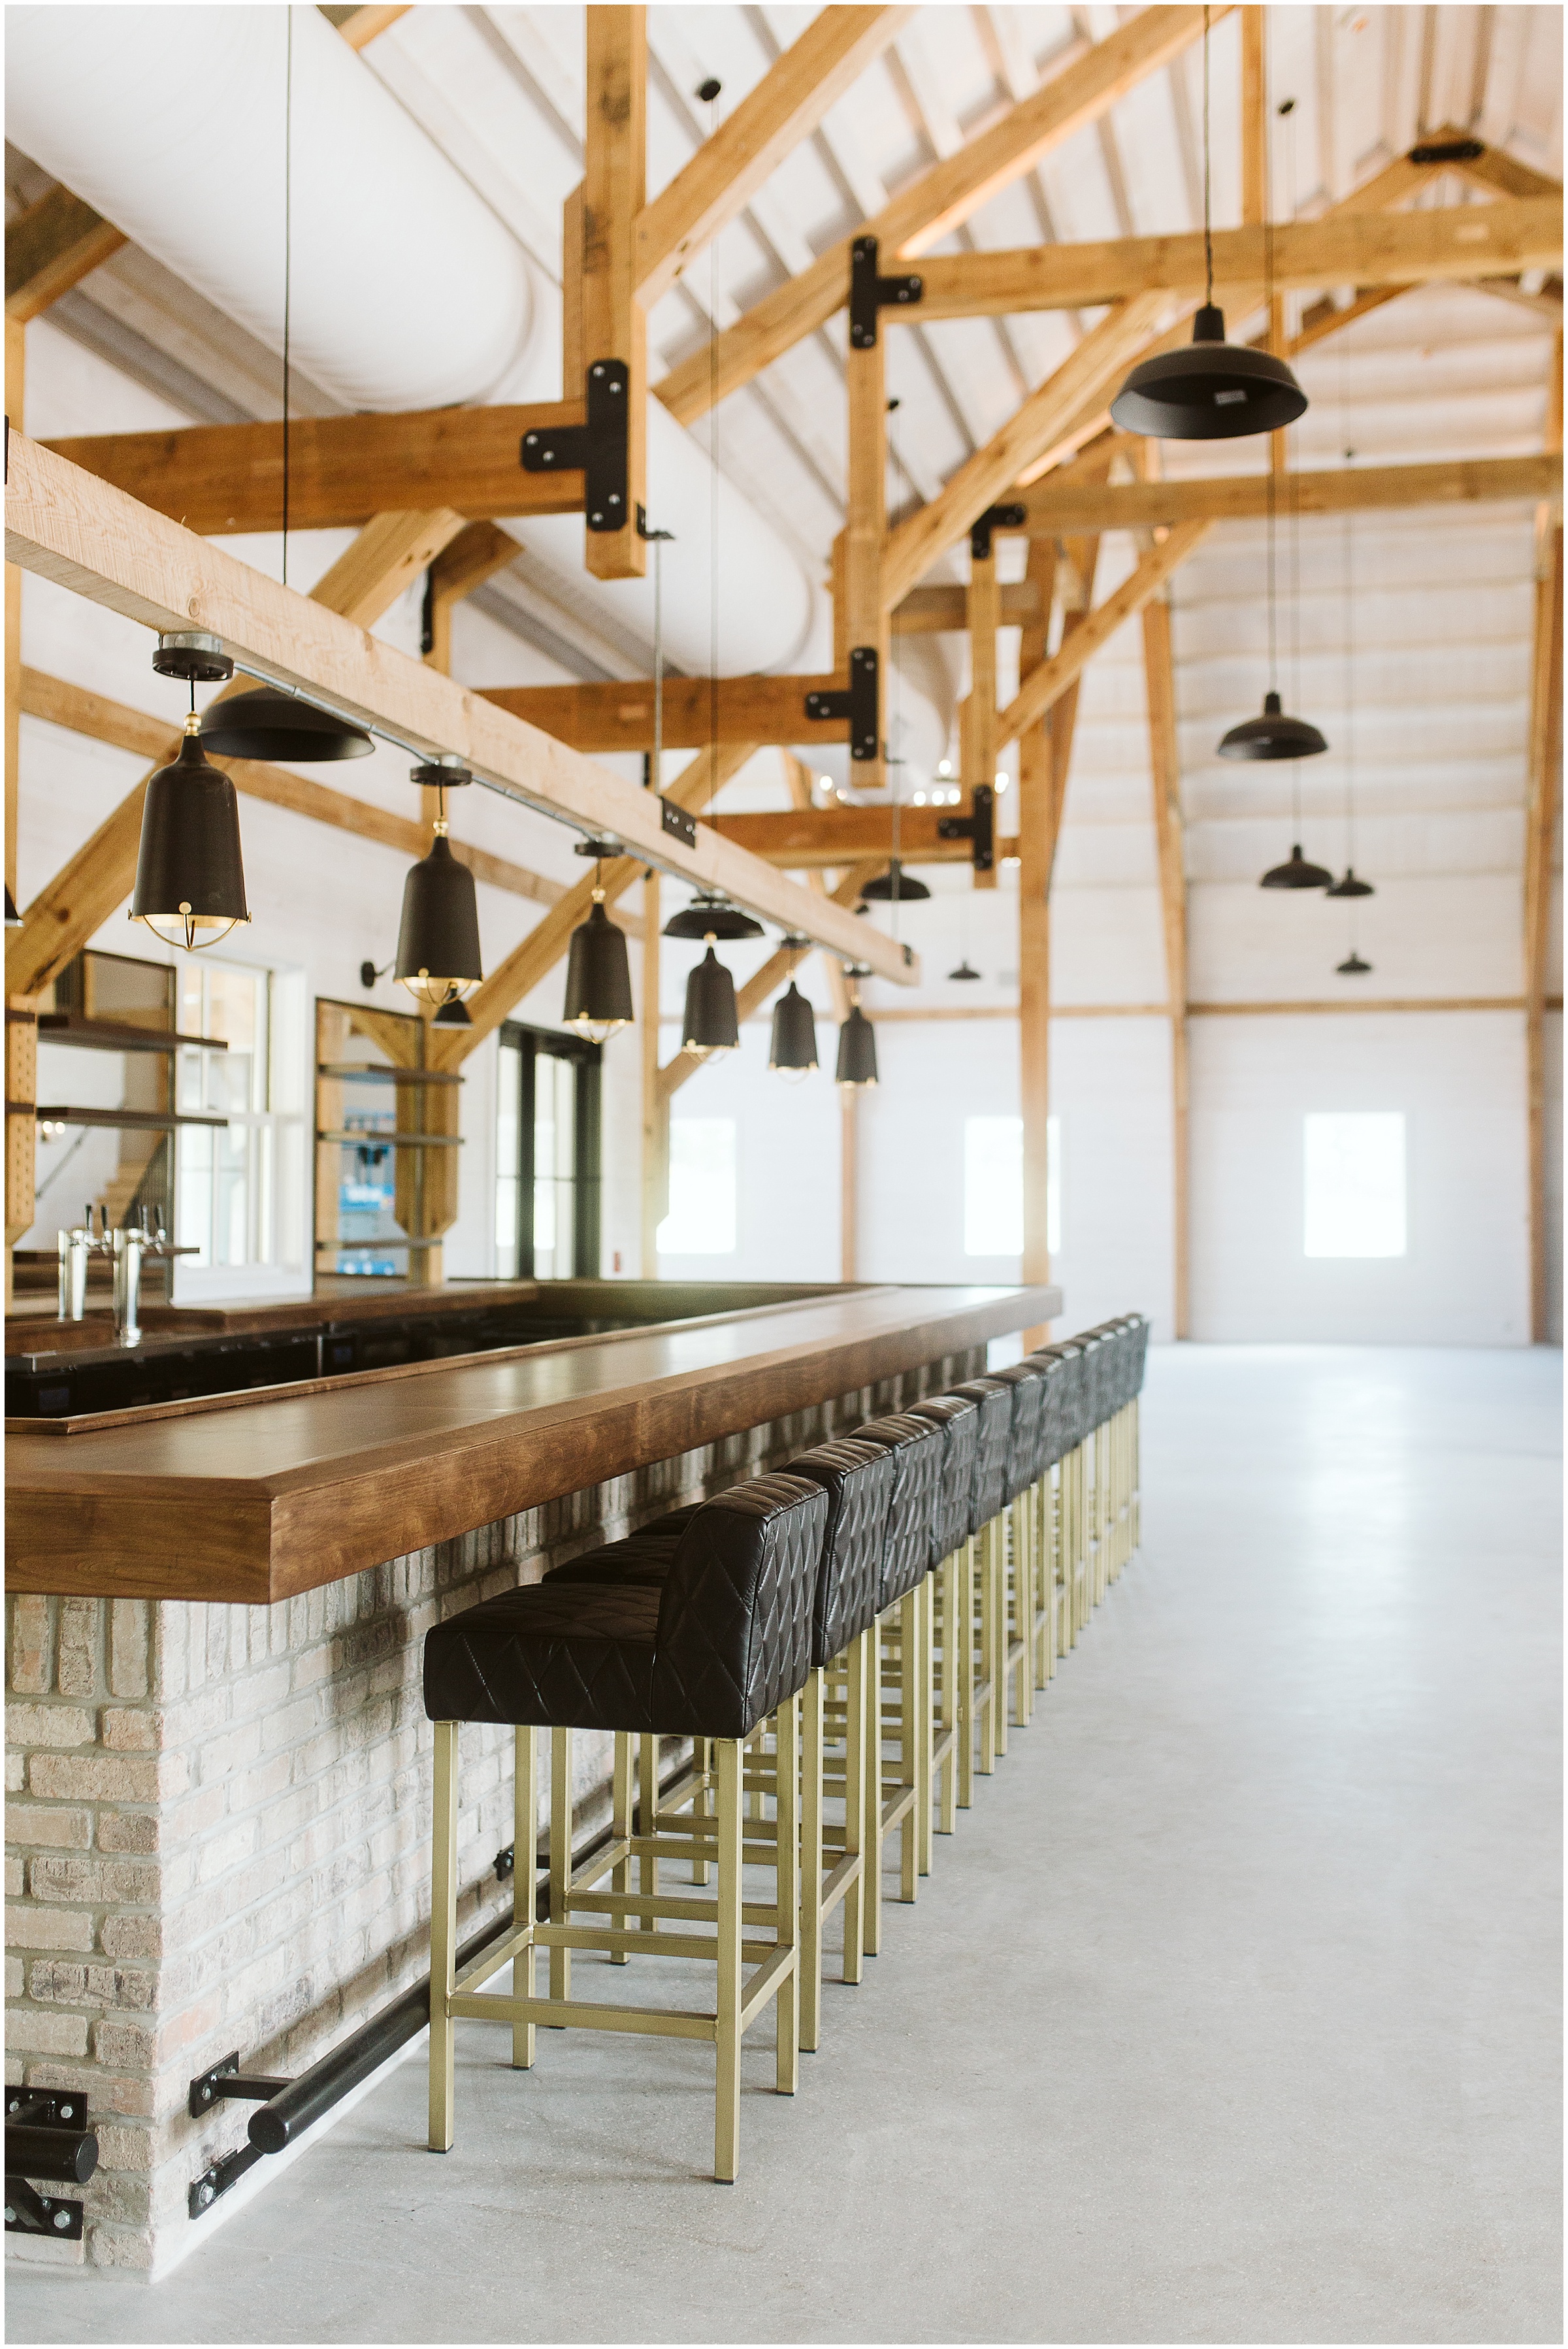 Northern Haus, Door County, Sister Bay, Venue, Alysa Rene Photography, Natural light, Modern Barn, Barn Wedding, White Barn, Sister Bay, Wisconsin, Midwest, Branding, Brand Photography,Commercia